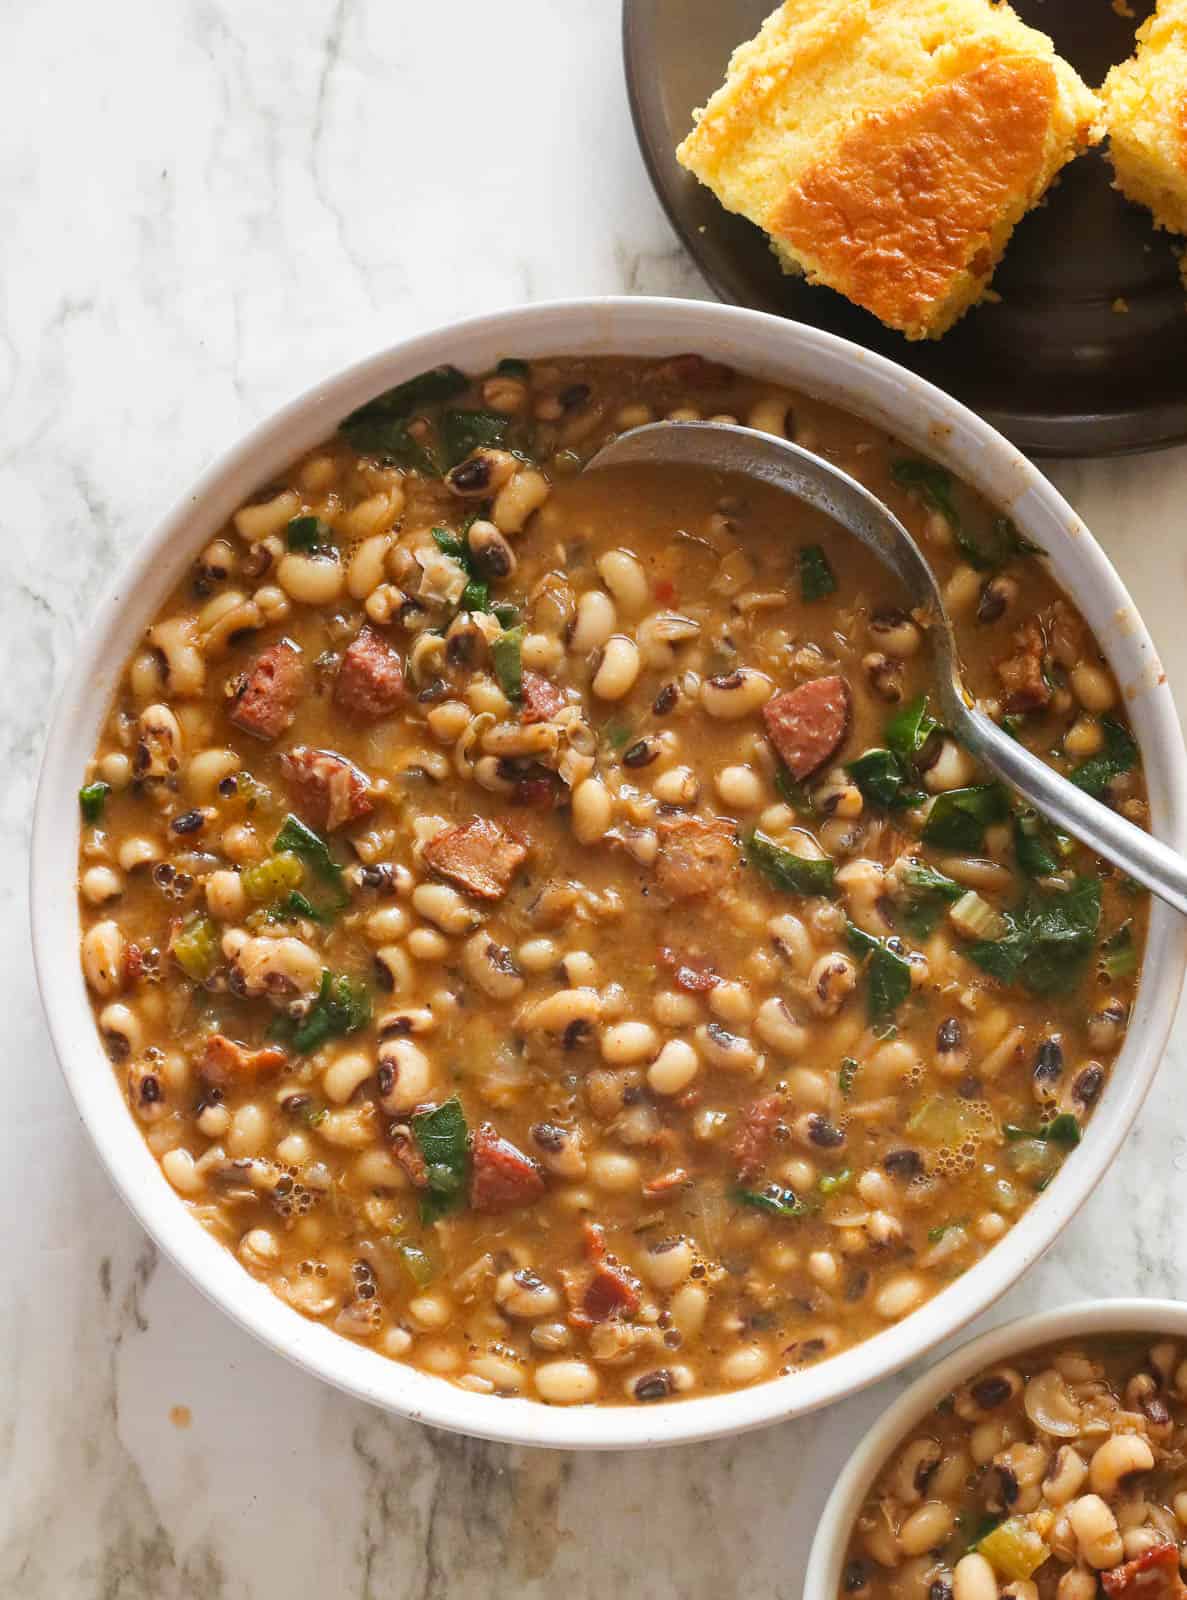 Canned Black Eyed Peas Recipes: Quick and Delicious Ideas